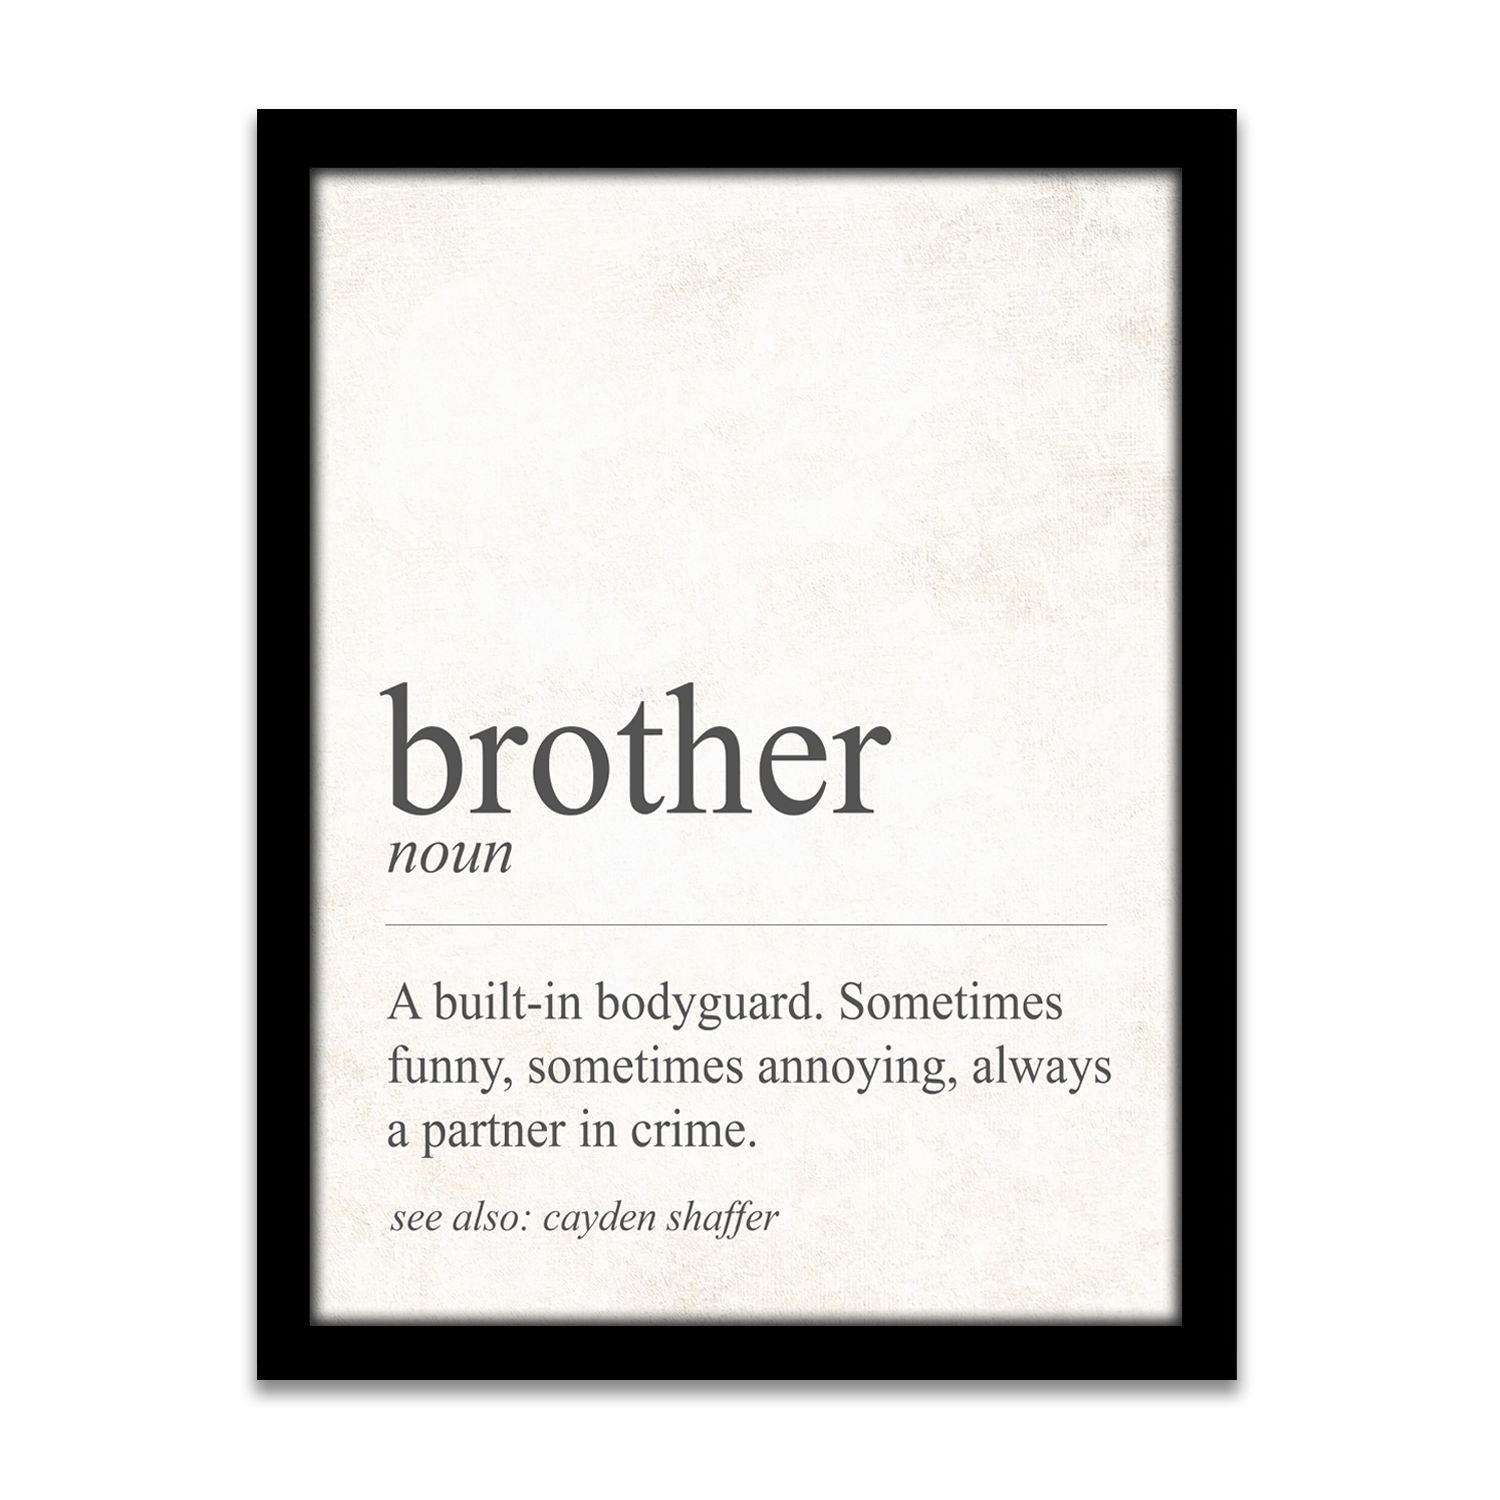 Definition of a Brother - Personalized gift for your brother